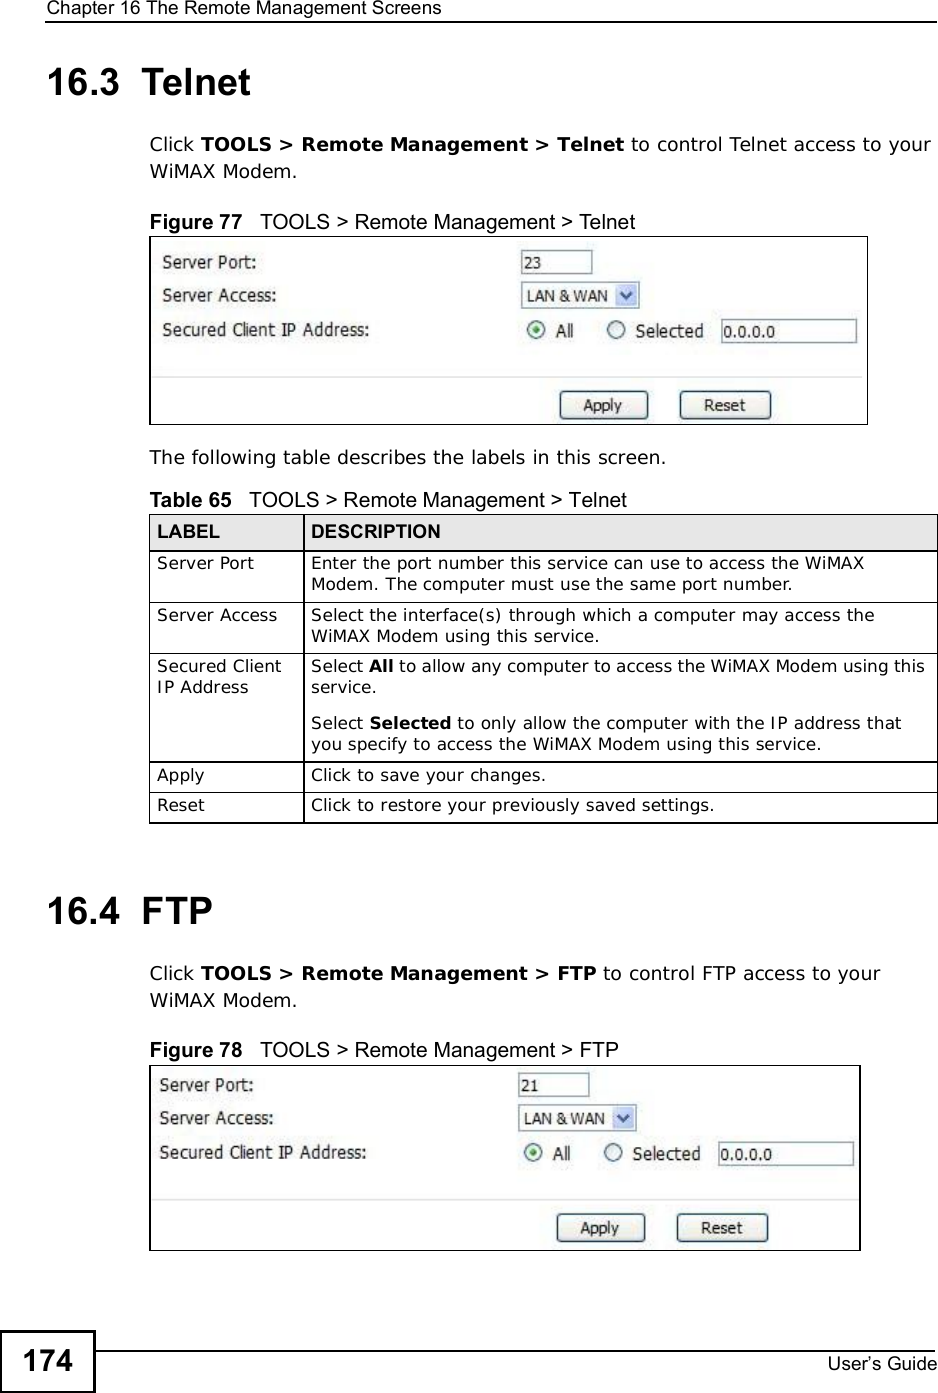 Chapter 16The Remote Management ScreensUser s Guide17416.3  TelnetClick TOOLS &gt; Remote Management &gt; Telnet to control Telnet access to your WiMAX Modem.Figure 77   TOOLS &gt; Remote Management &gt; TelnetThe following table describes the labels in this screen.16.4  FTPClick TOOLS &gt; Remote Management &gt; FTP to control FTP access to your WiMAX Modem.Figure 78   TOOLS &gt; Remote Management &gt; FTPTable 65   TOOLS &gt; Remote Management &gt; TelnetLABEL DESCRIPTIONServer Port Enter the port number this service can use to access the WiMAX Modem. The computer must use the same port number.Server Access Select the interface(s) through which a computer may access the WiMAX Modem using this service.Secured Client IP Address Select All to allow any computer to access the WiMAX Modem using this service.Select Selected to only allow the computer with the IP address that you specify to access the WiMAX Modem using this service.Apply Click to save your changes.Reset Click to restore your previously saved settings.